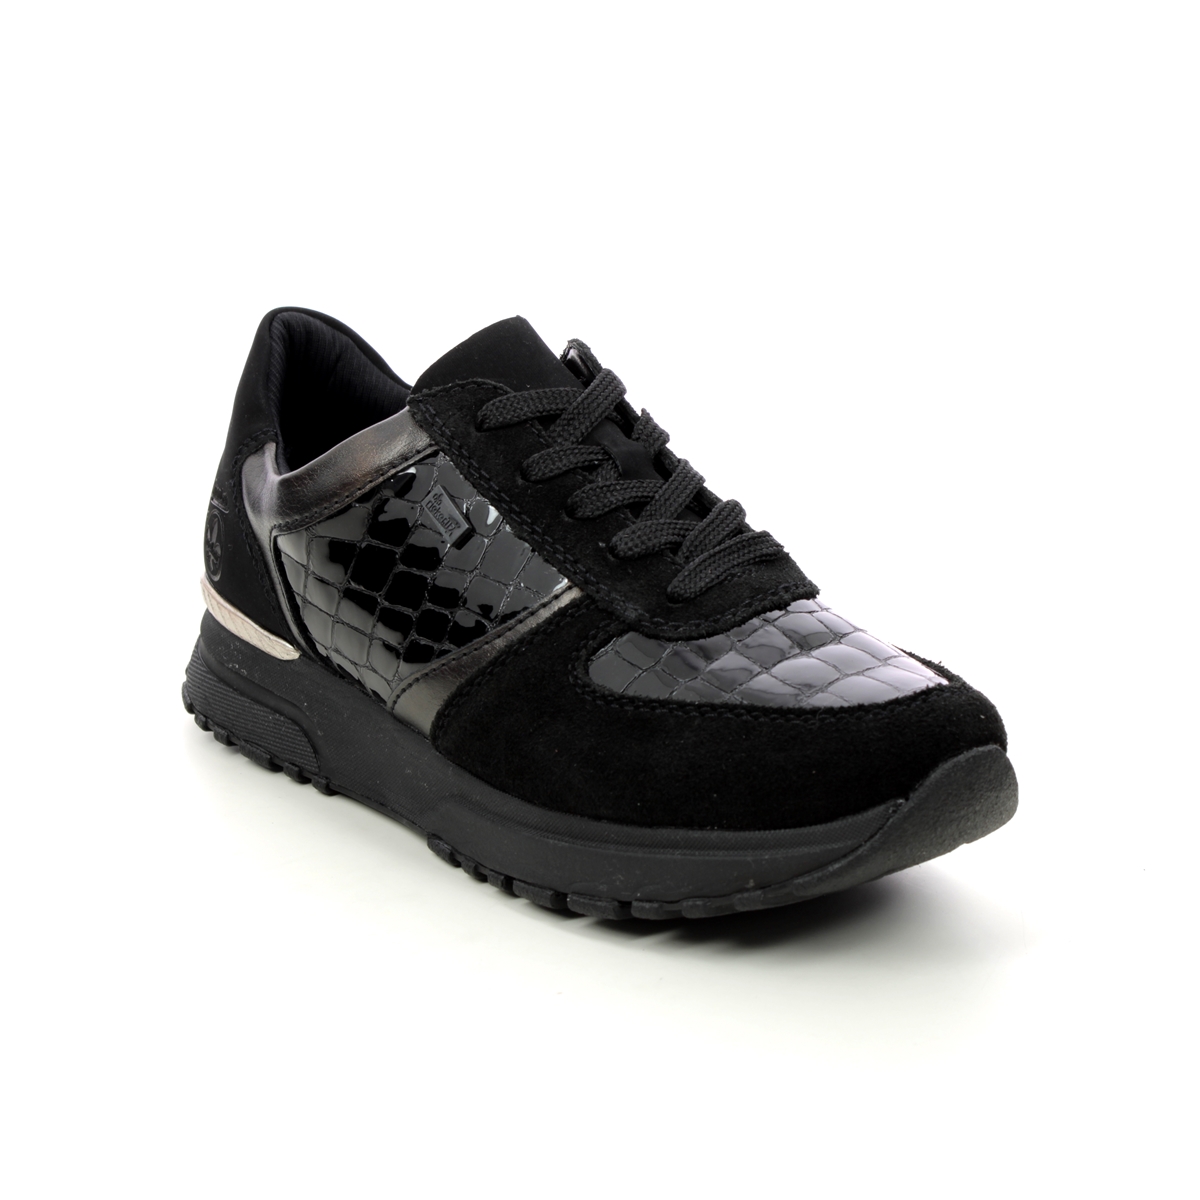 Rieker Govicroc Effect Black Patent Suede Womens Trainers N7412-00 In Size 40 In Plain Black Patent Suede